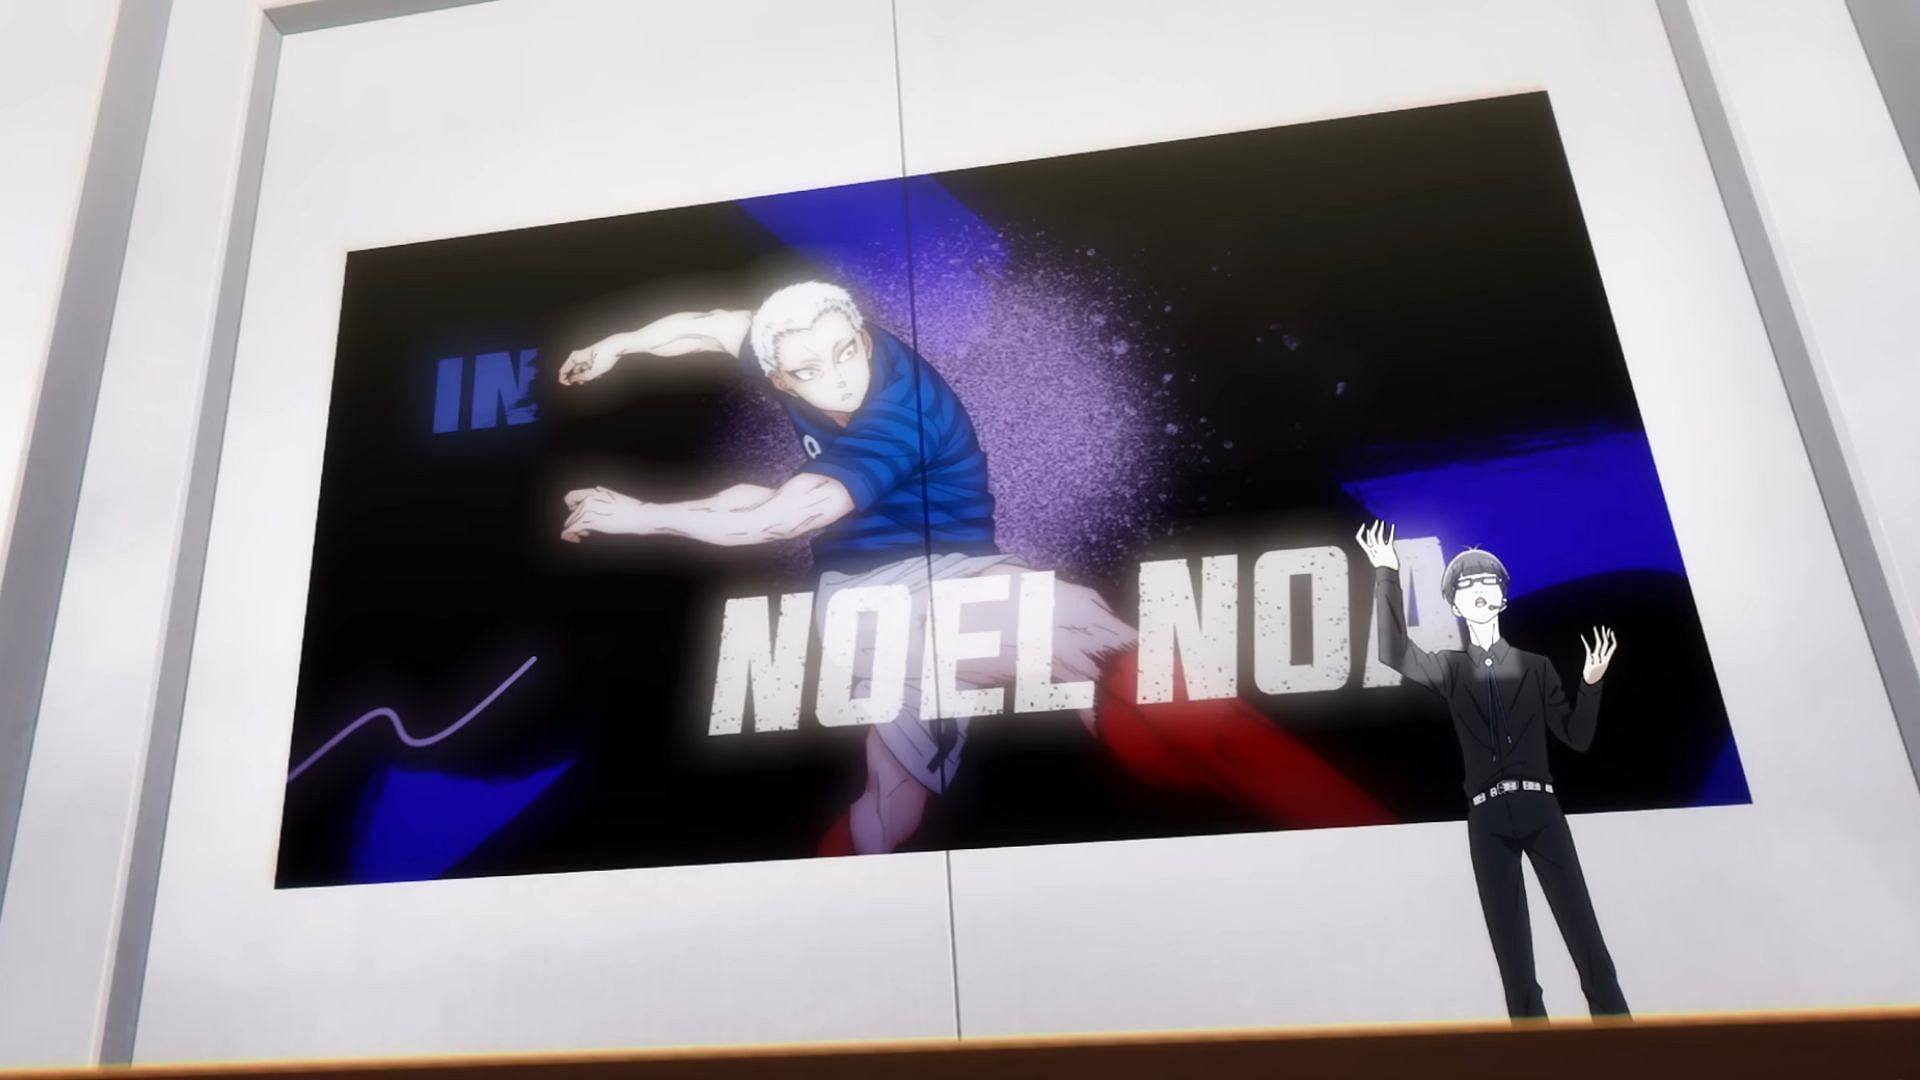 Jinpachi Ego speaking about Noel Noa as seen in the anime (Image via 8bit)